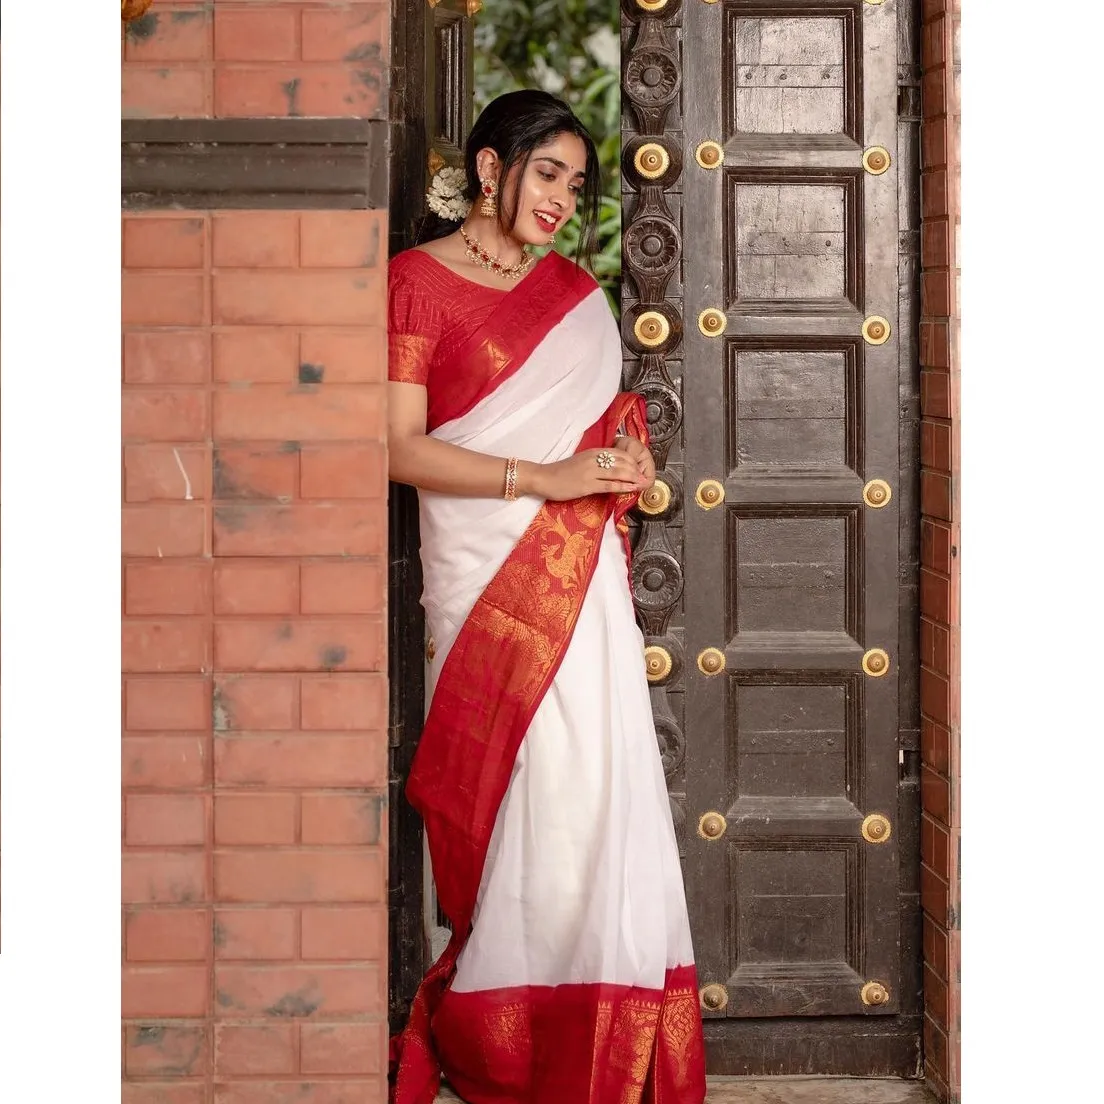 Best Quality Soft Silk Banarasi Saree With Best Design Zari Border Buy at Lowest Price in royal export